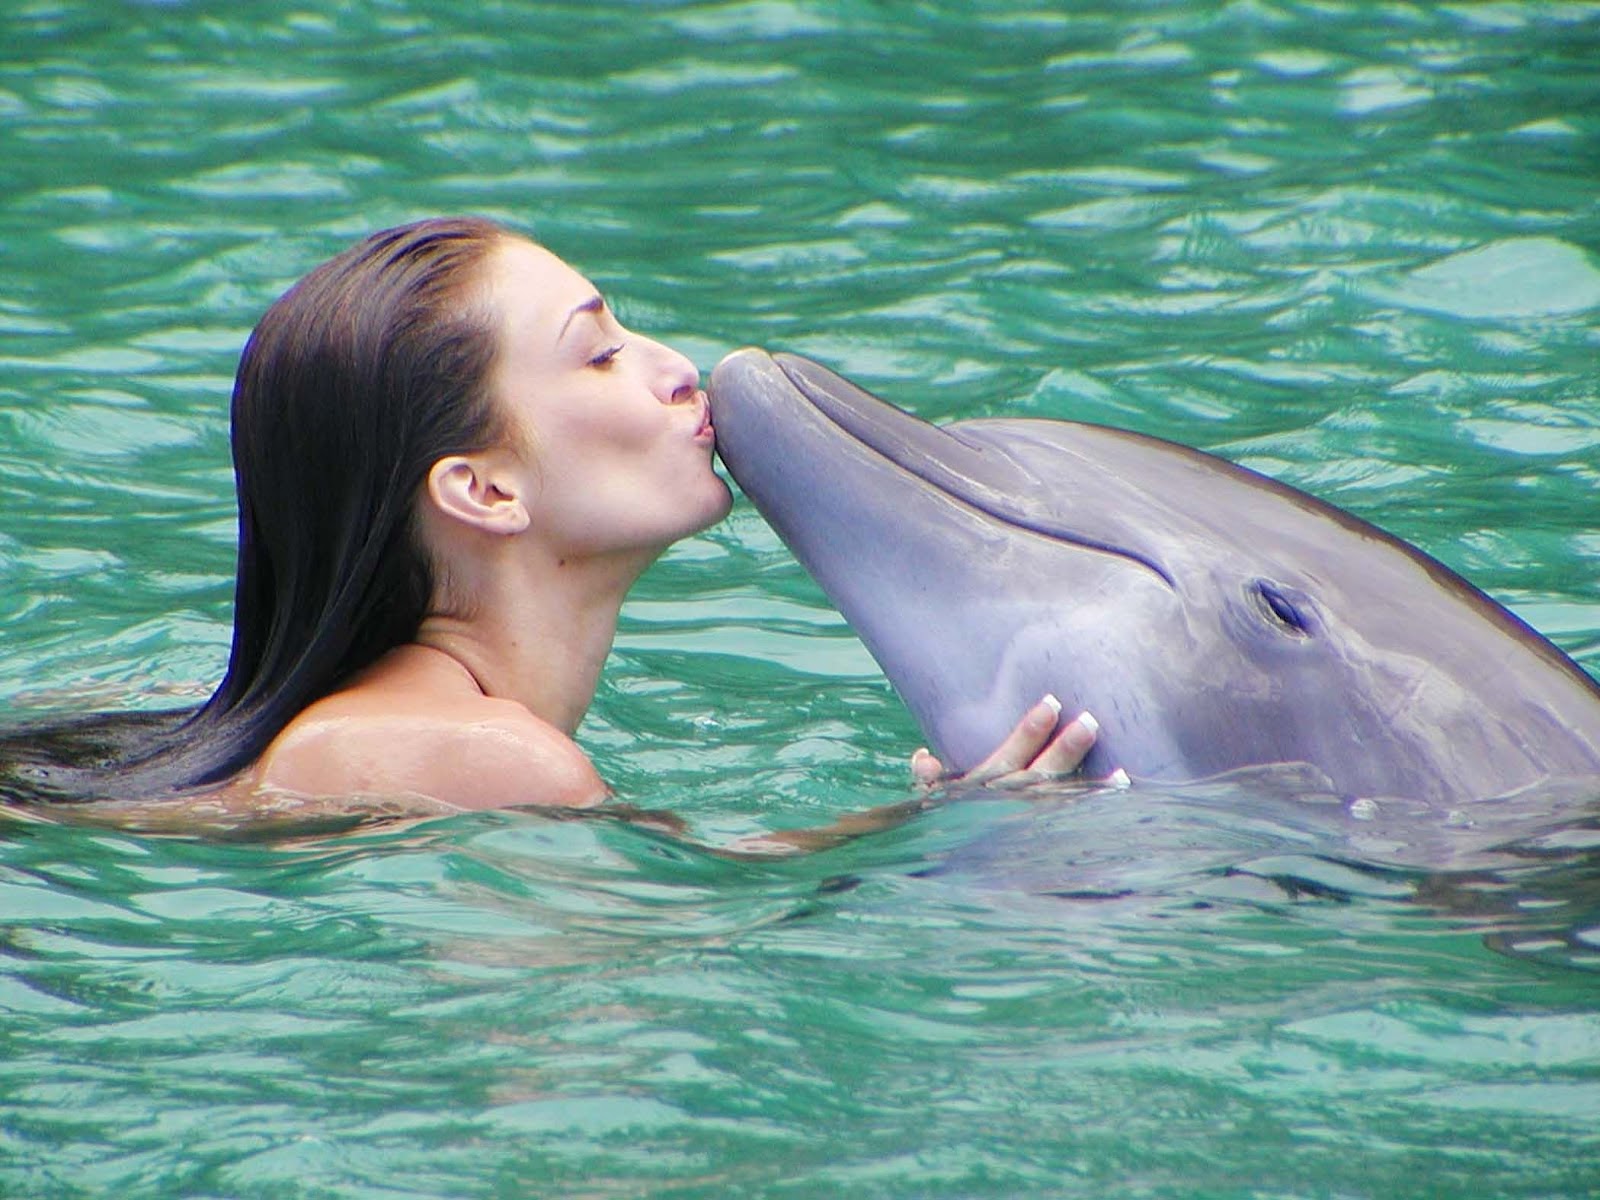 Dolphin sex with girl - Hot Nude